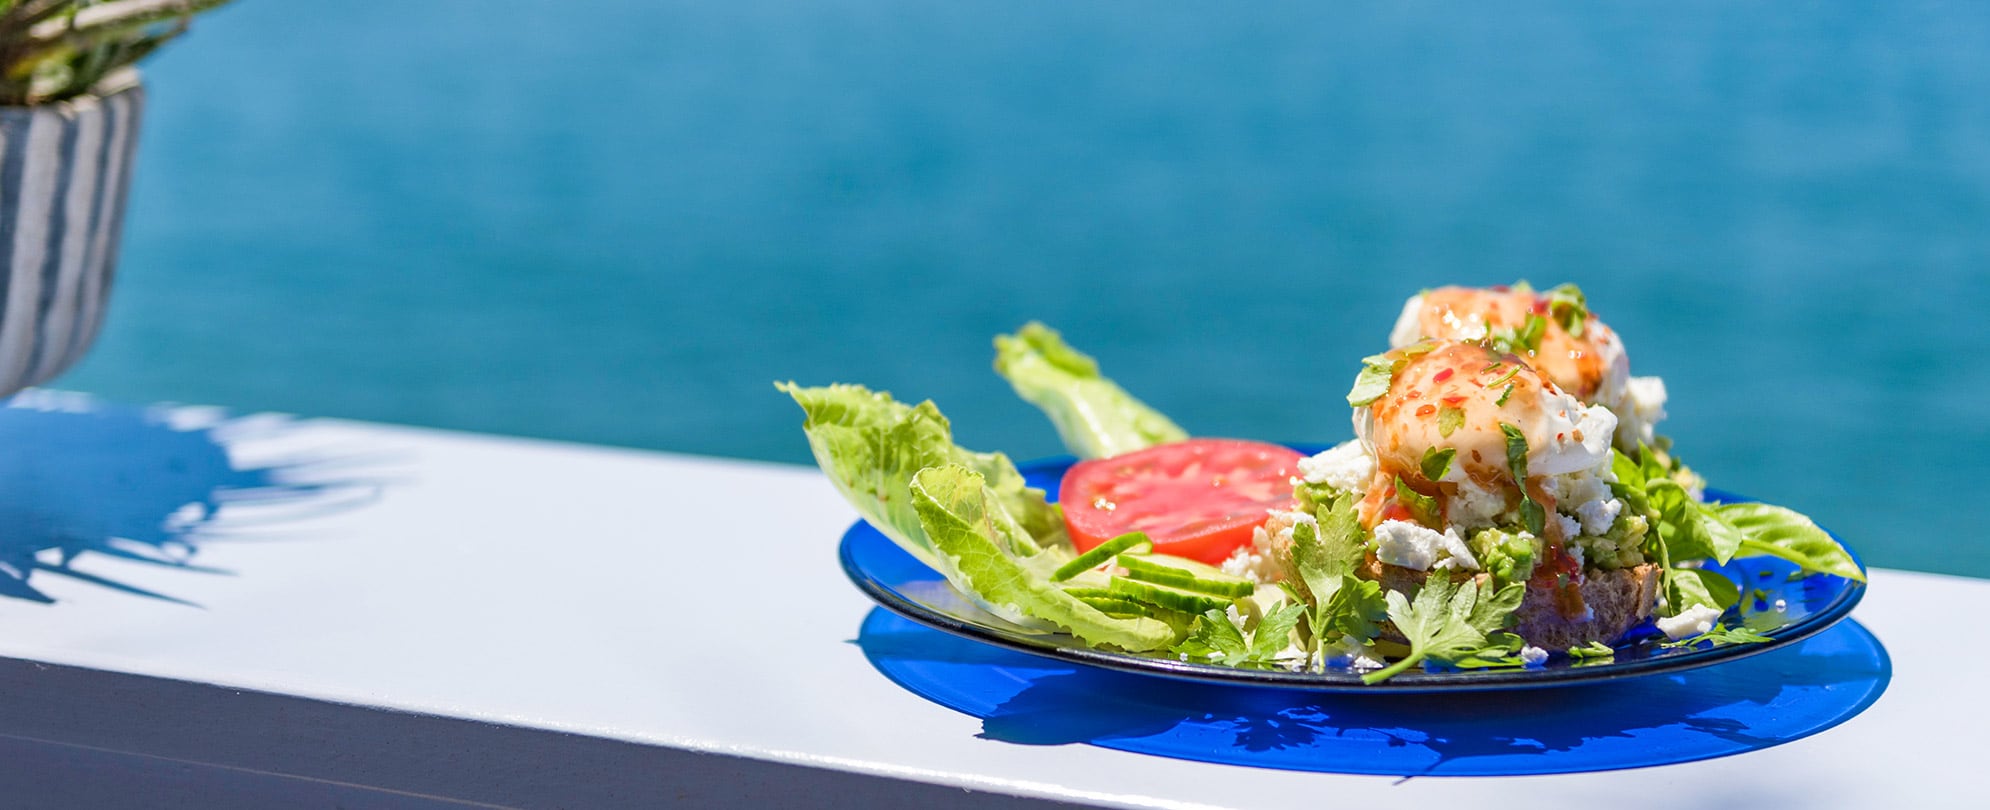 A plate of food with lettuce and tomatoes at a La Jolla, California restaurant.